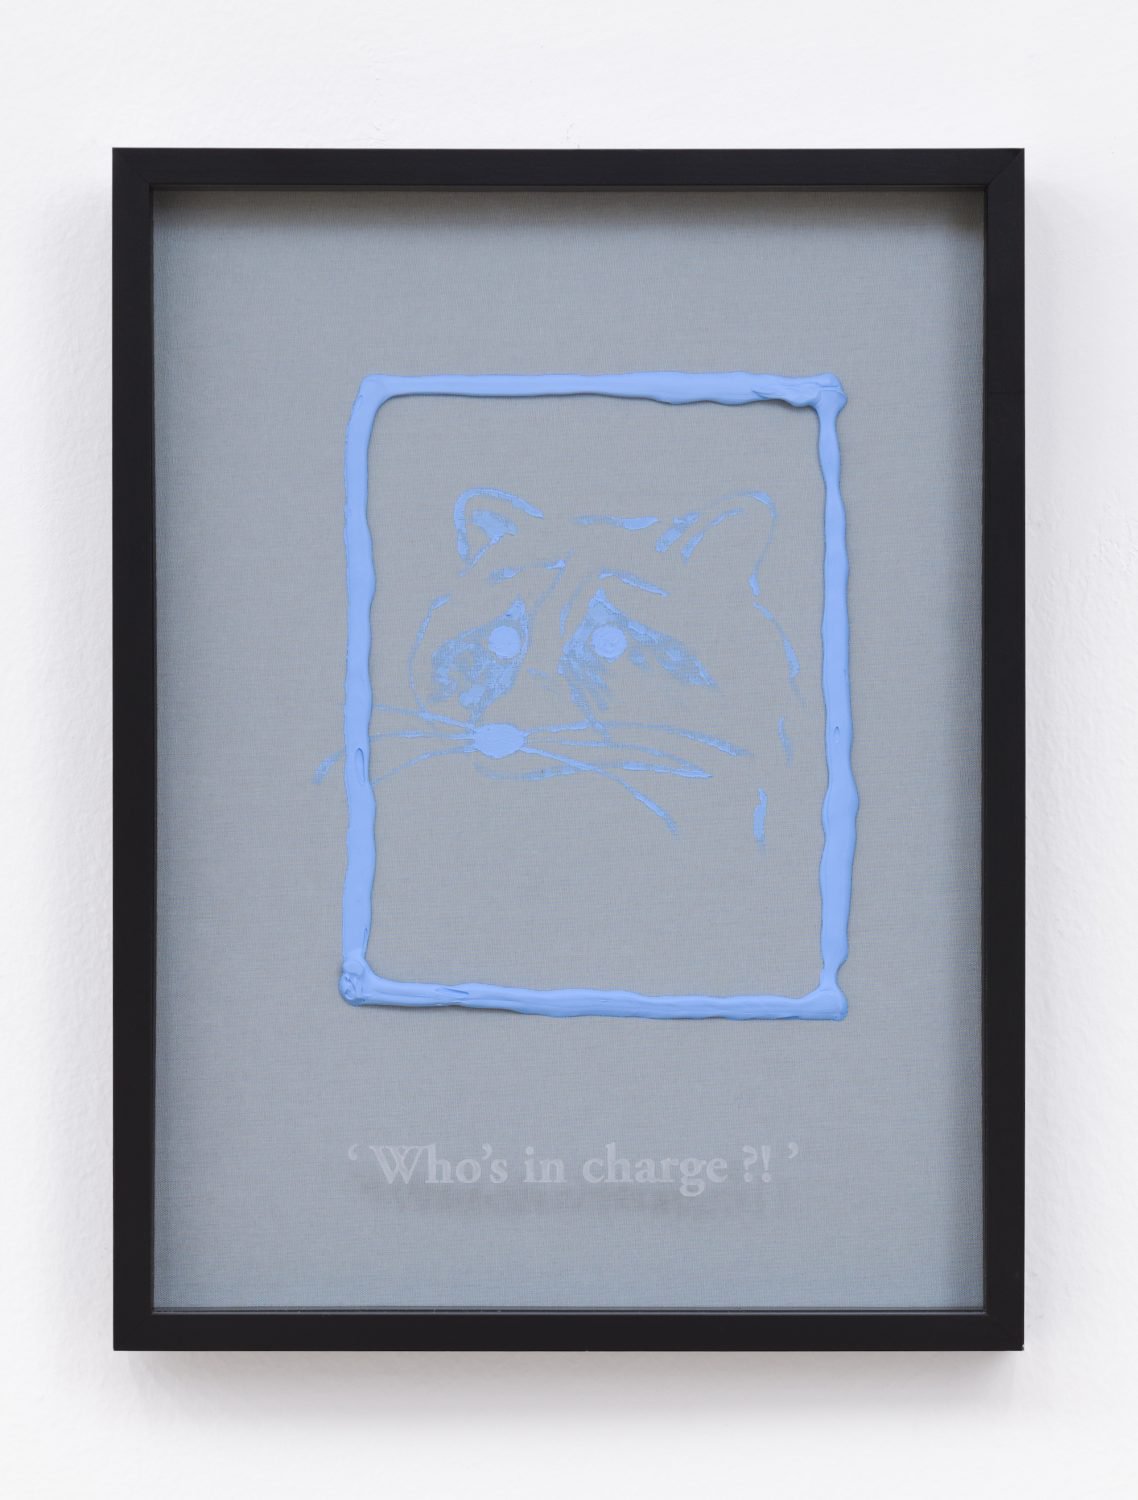 Philipp Timischl&quot;Who&#x27;s in charge?!&quot; (Light Grey/Royal Blue Light), 2017Acrylic on linen and glass-engraved object frame40.1 x 32.1 cm, unique